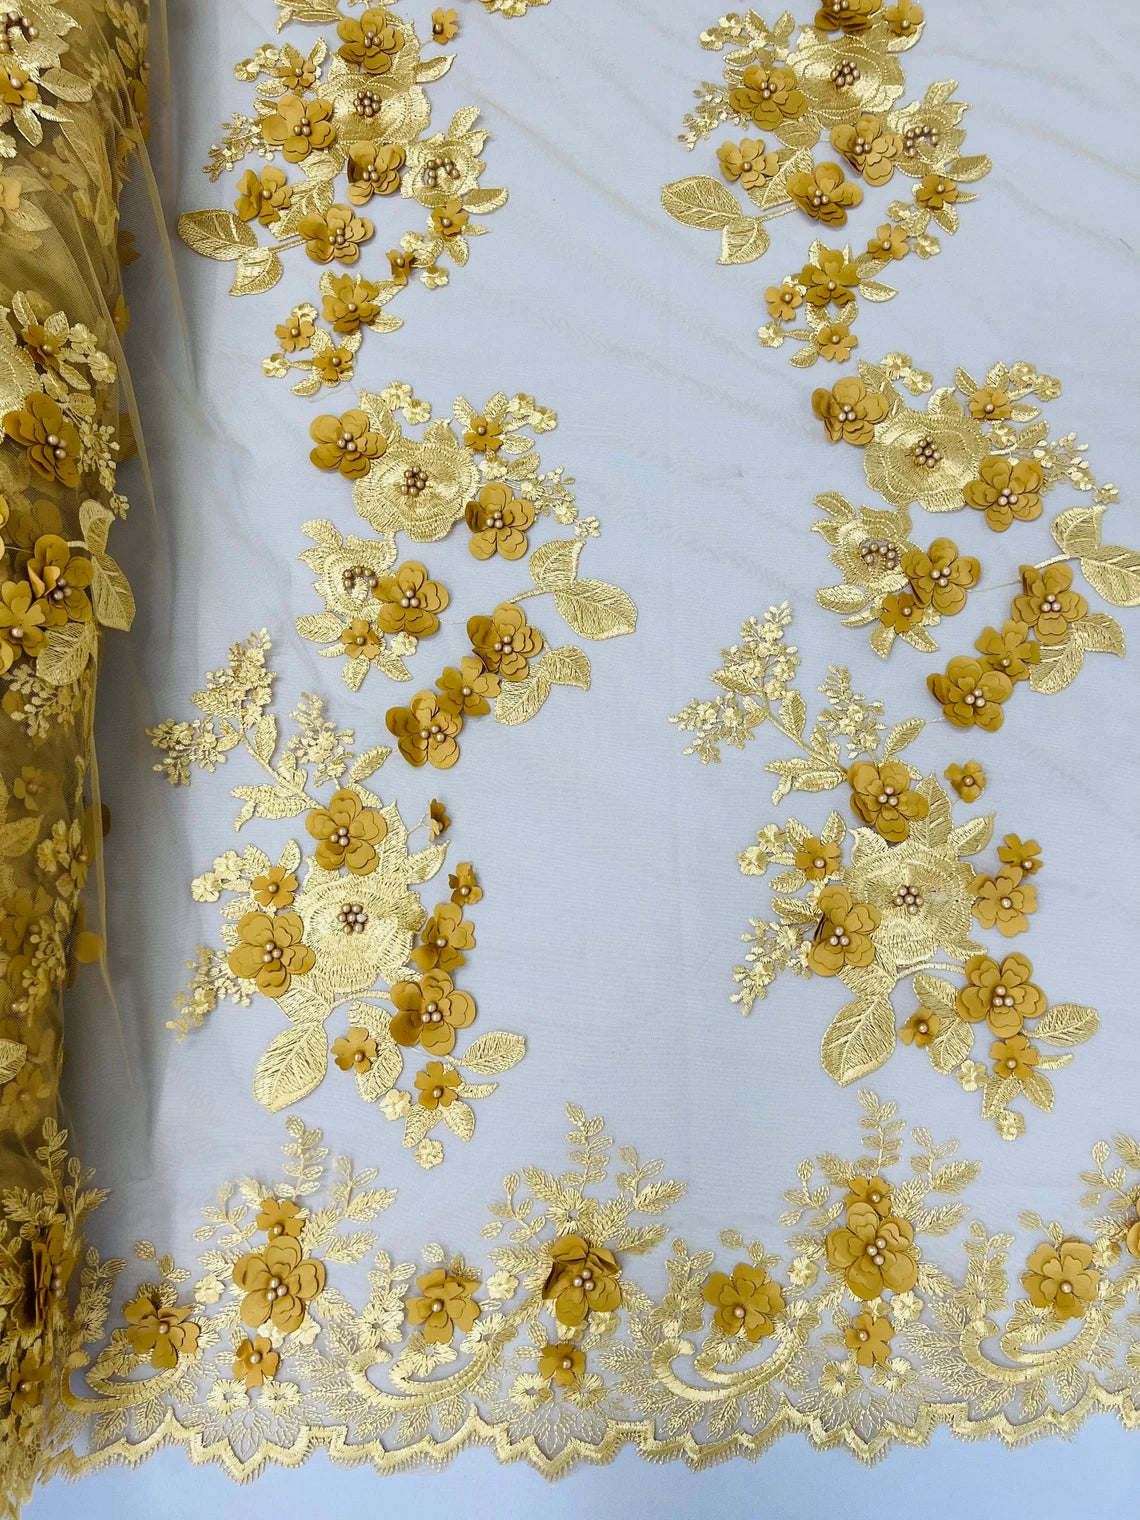 3D Flower Panels Fabric - Gold - Flower Panels Bead Embroidered on Lace Fabric Sold By Yard